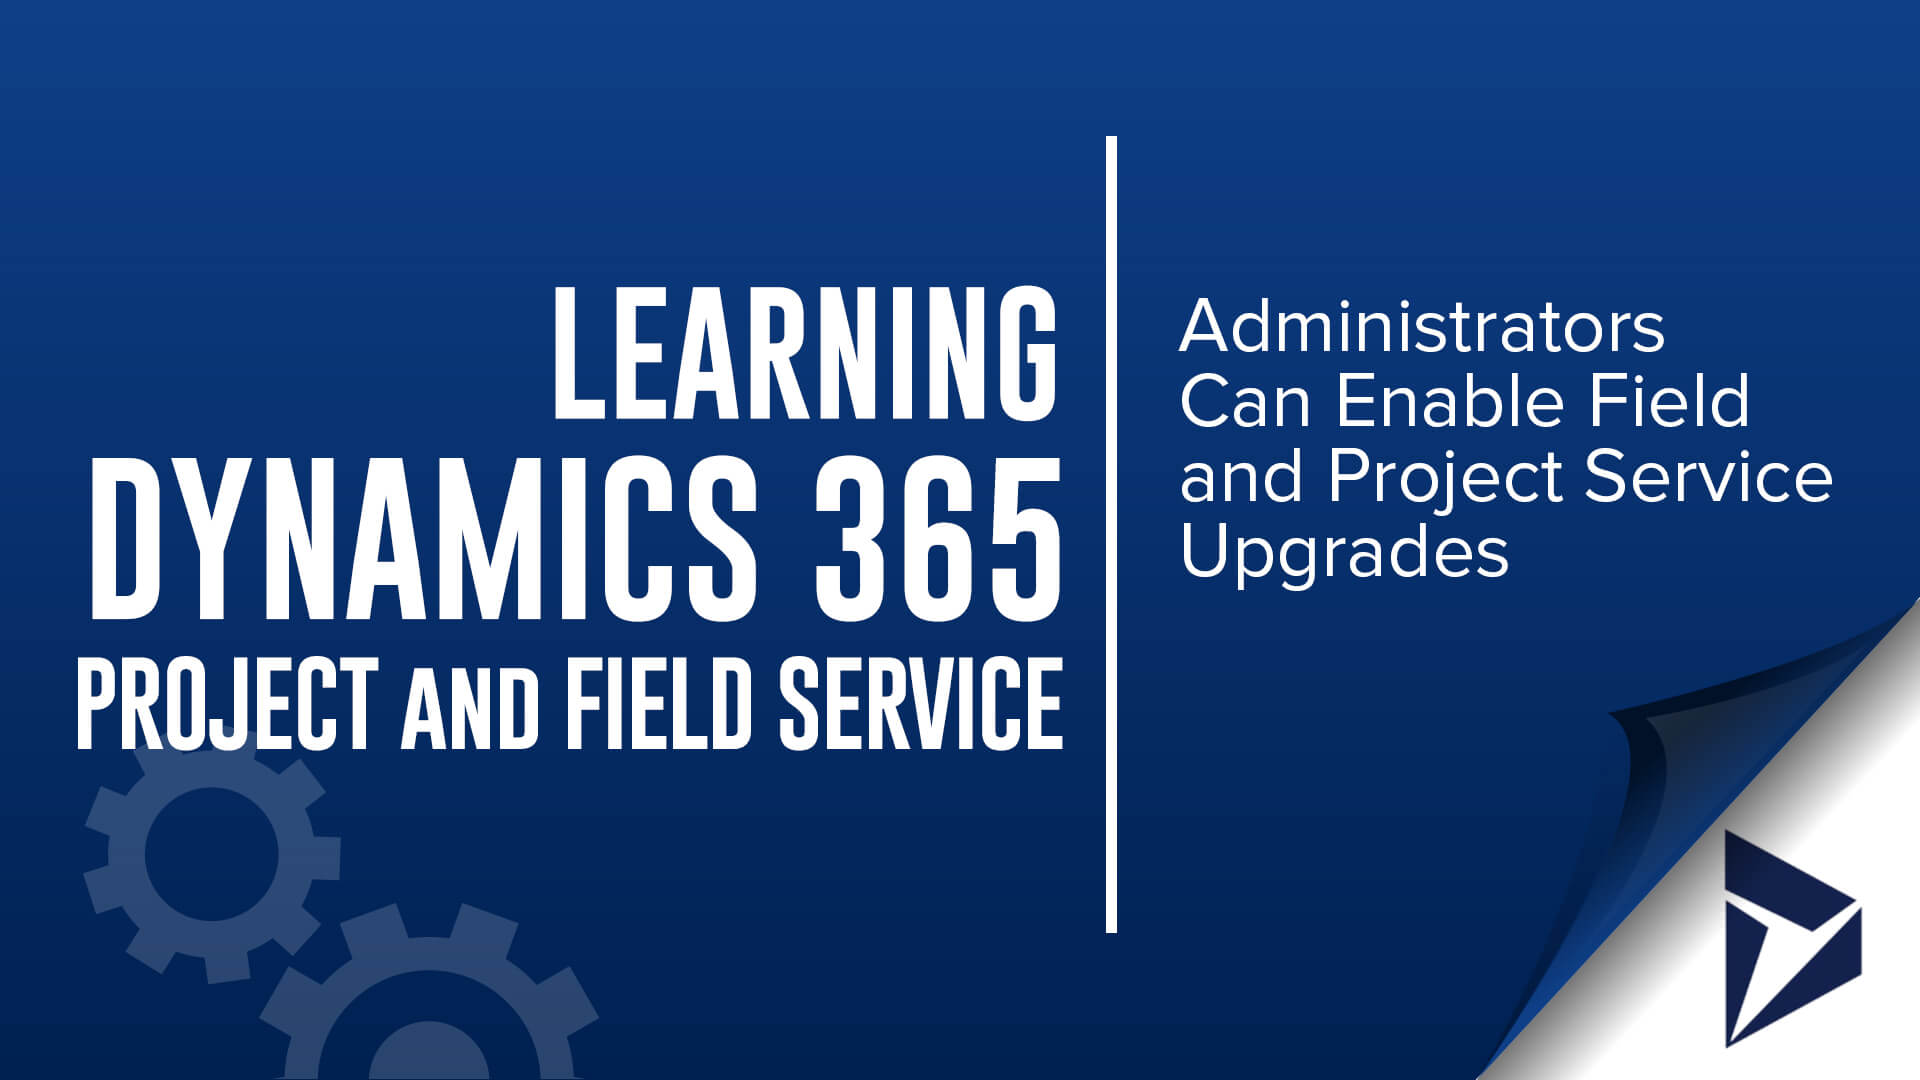 learning DYNAMICS Project and field service - administrators can now enable upgrades in project and field service